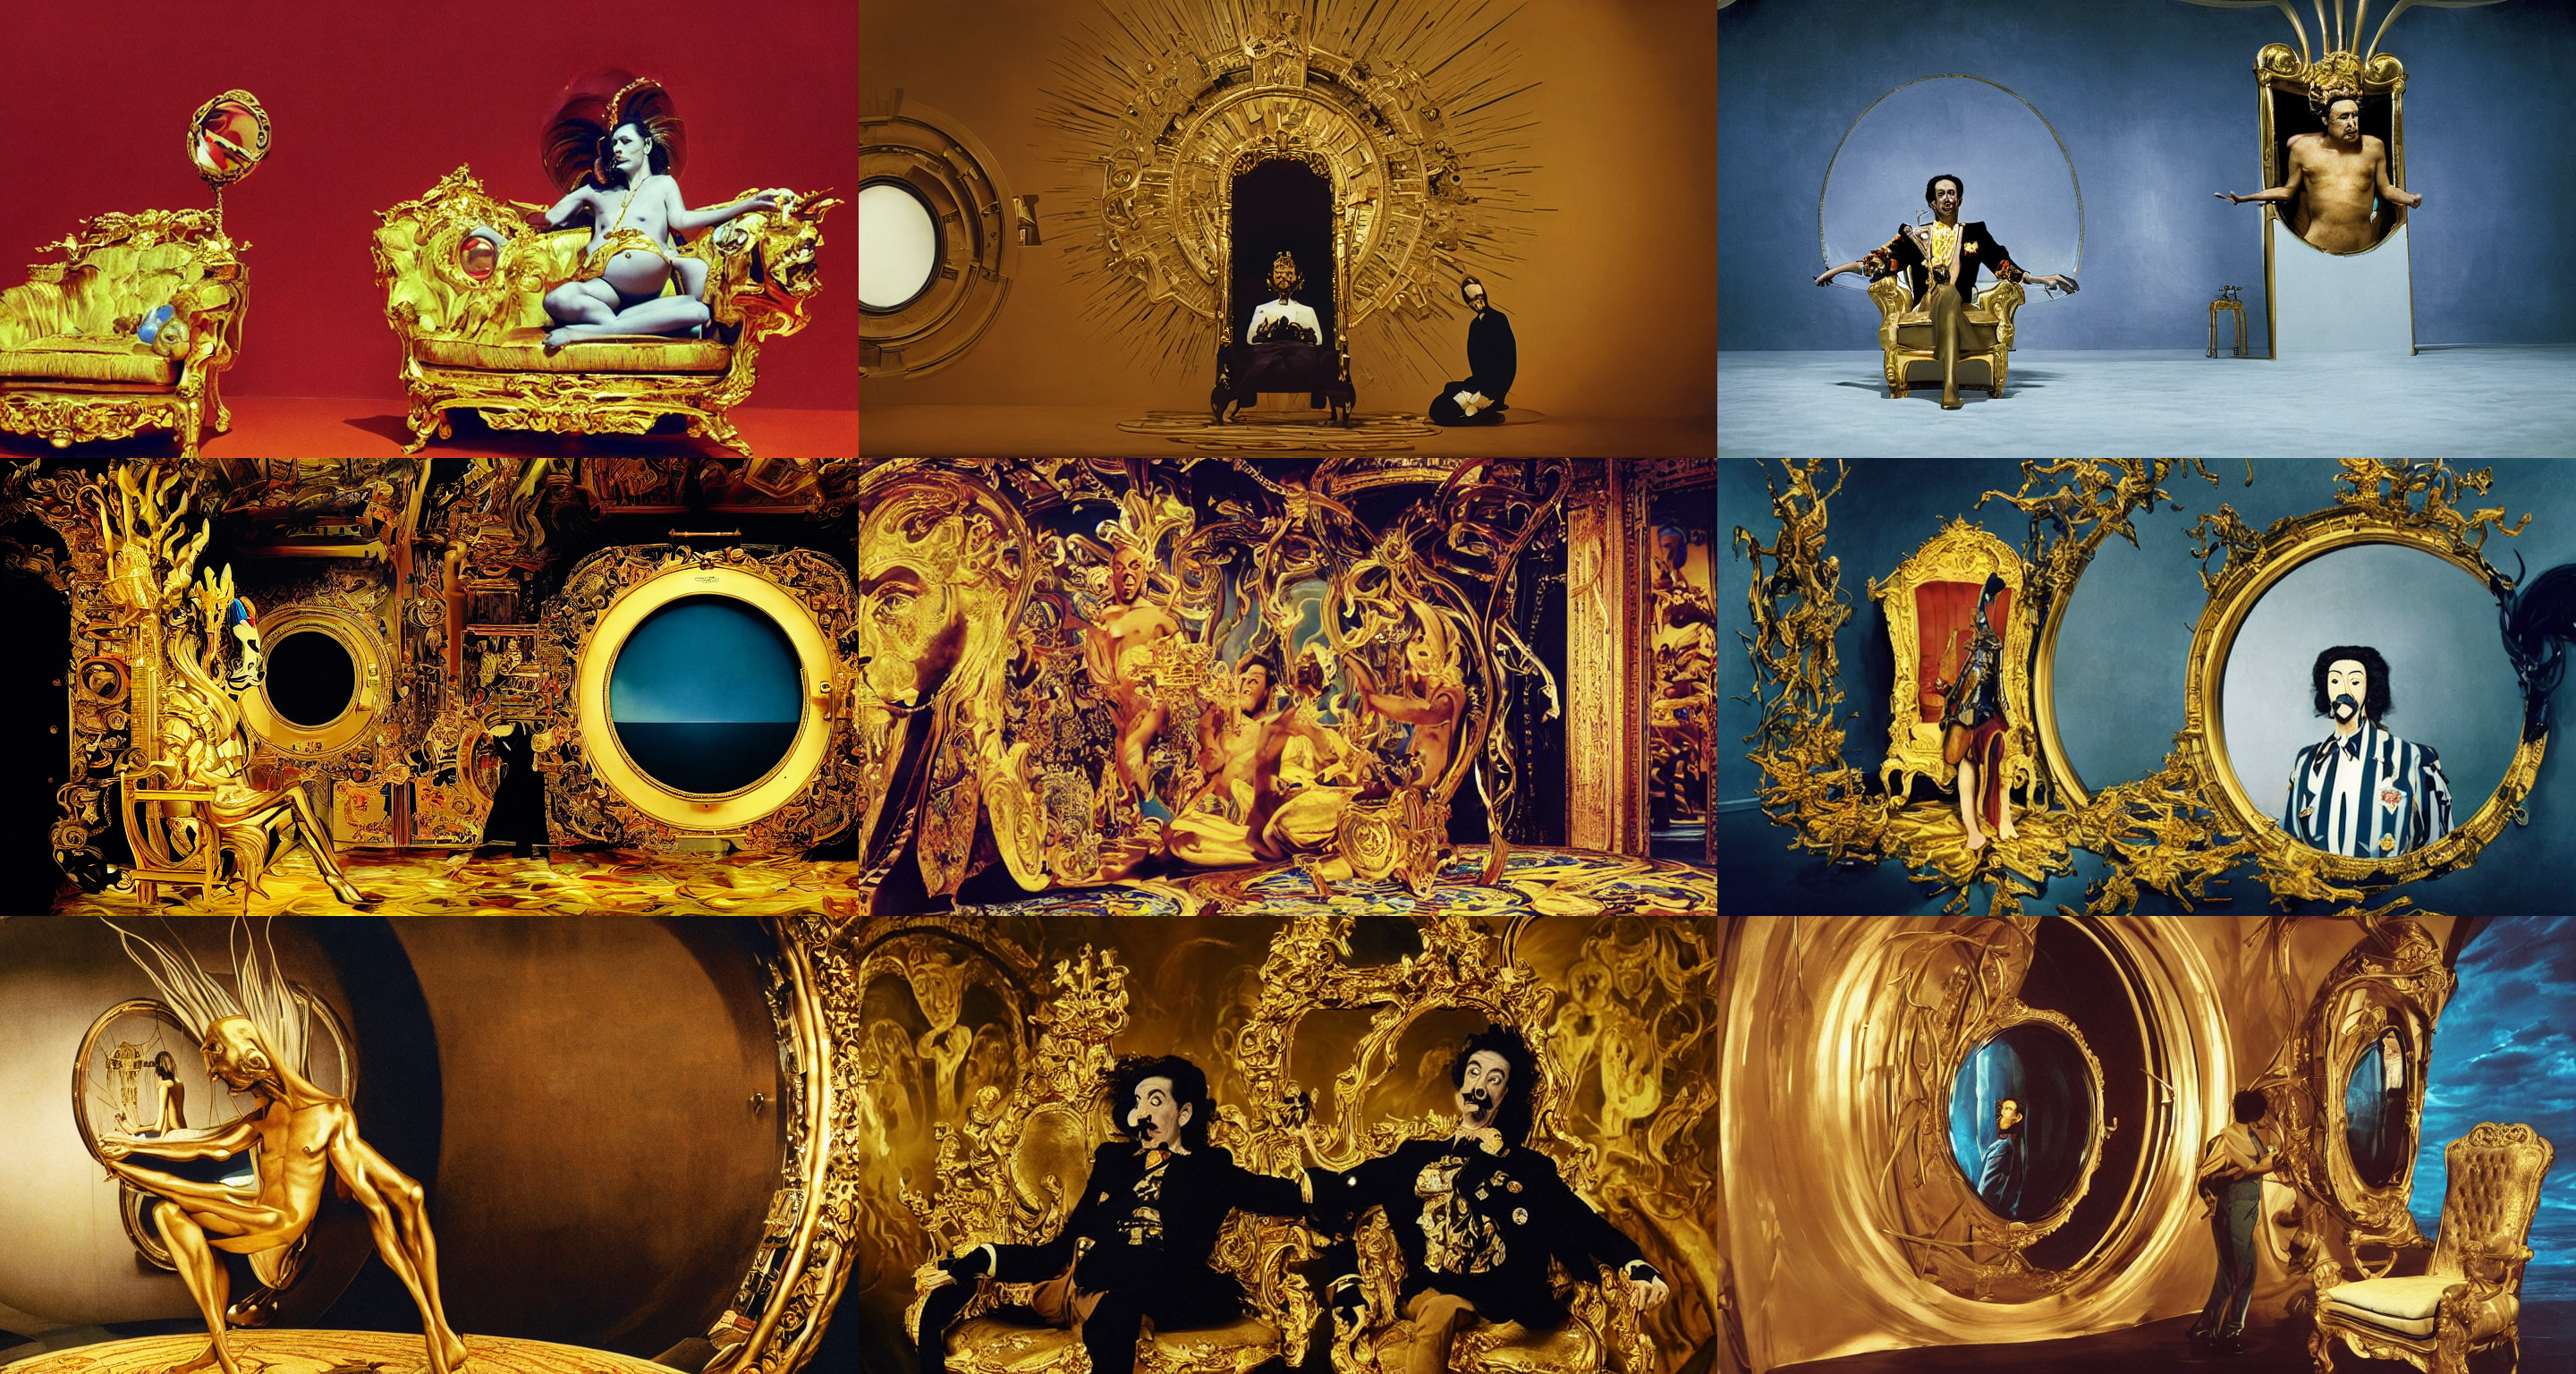 foreground : crazy magnificent emperor which looks like salvador dali sits on a gold chair in a dark room | background : a huge porthole in which space is visible | from the movie by alejandro jodorowsky with the cinematography of christopher doyle and art direction by hans giger, anamorphic lens, kodachrome, 8 k